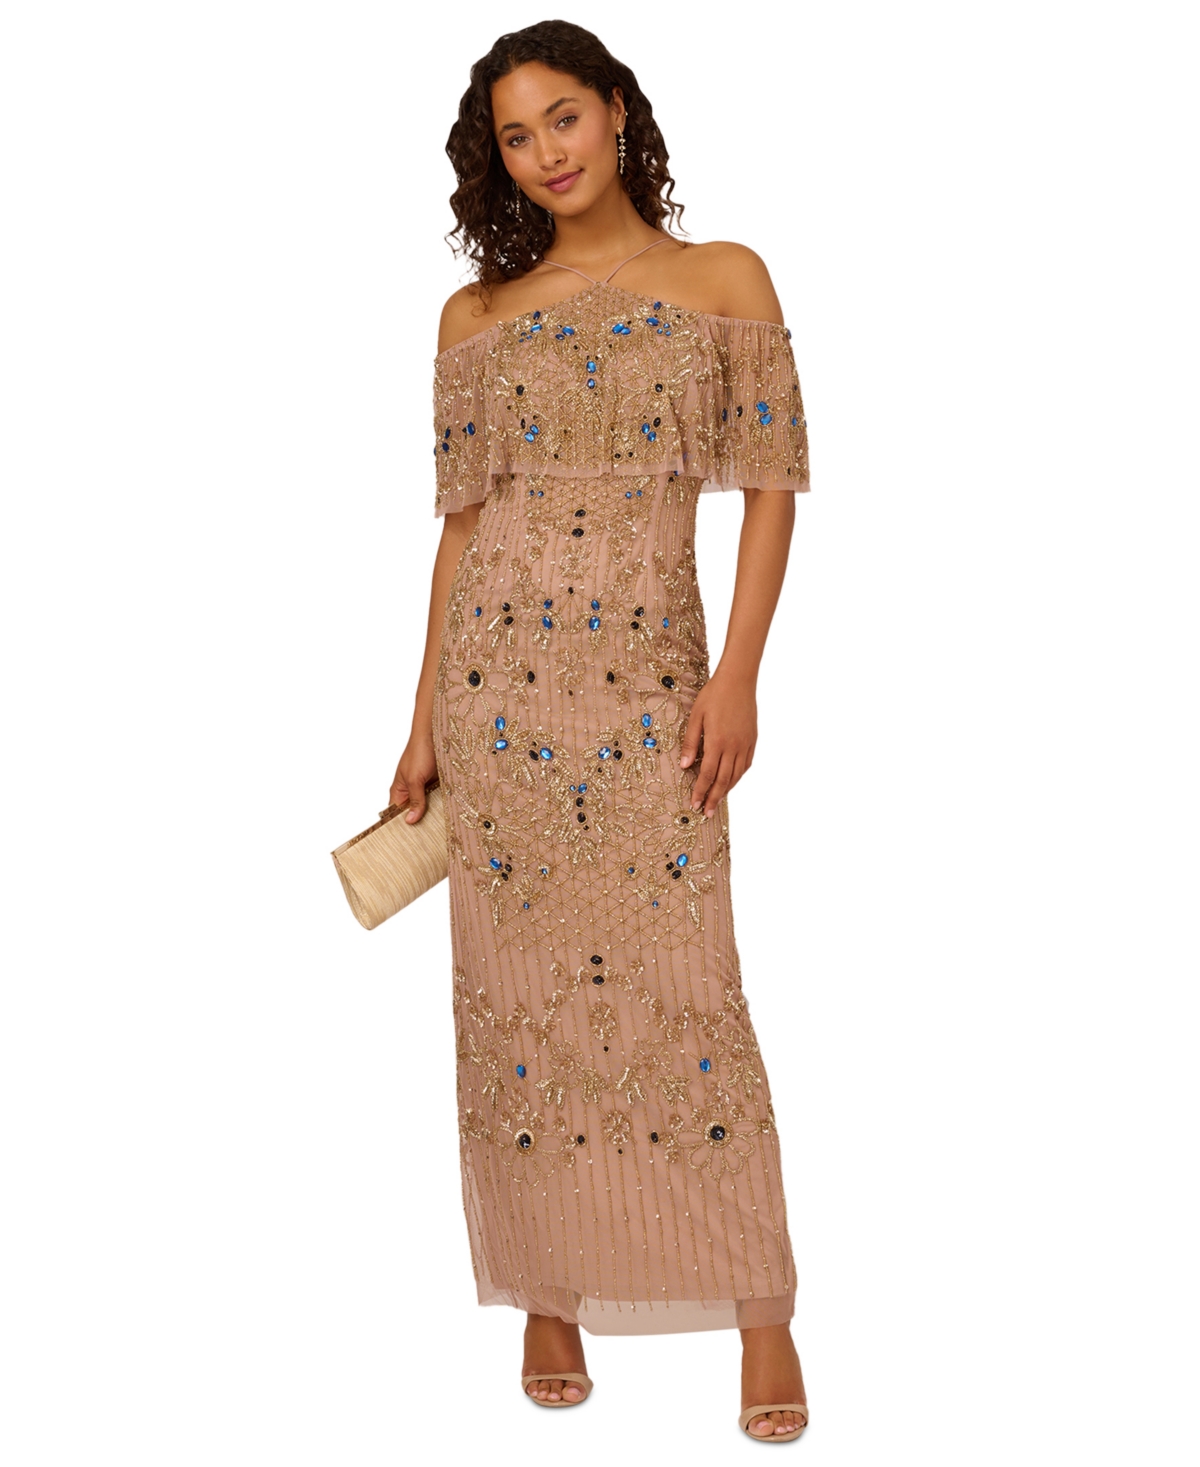 Women's Beaded Mesh Cold-Shoulder Gown - Rose Gold